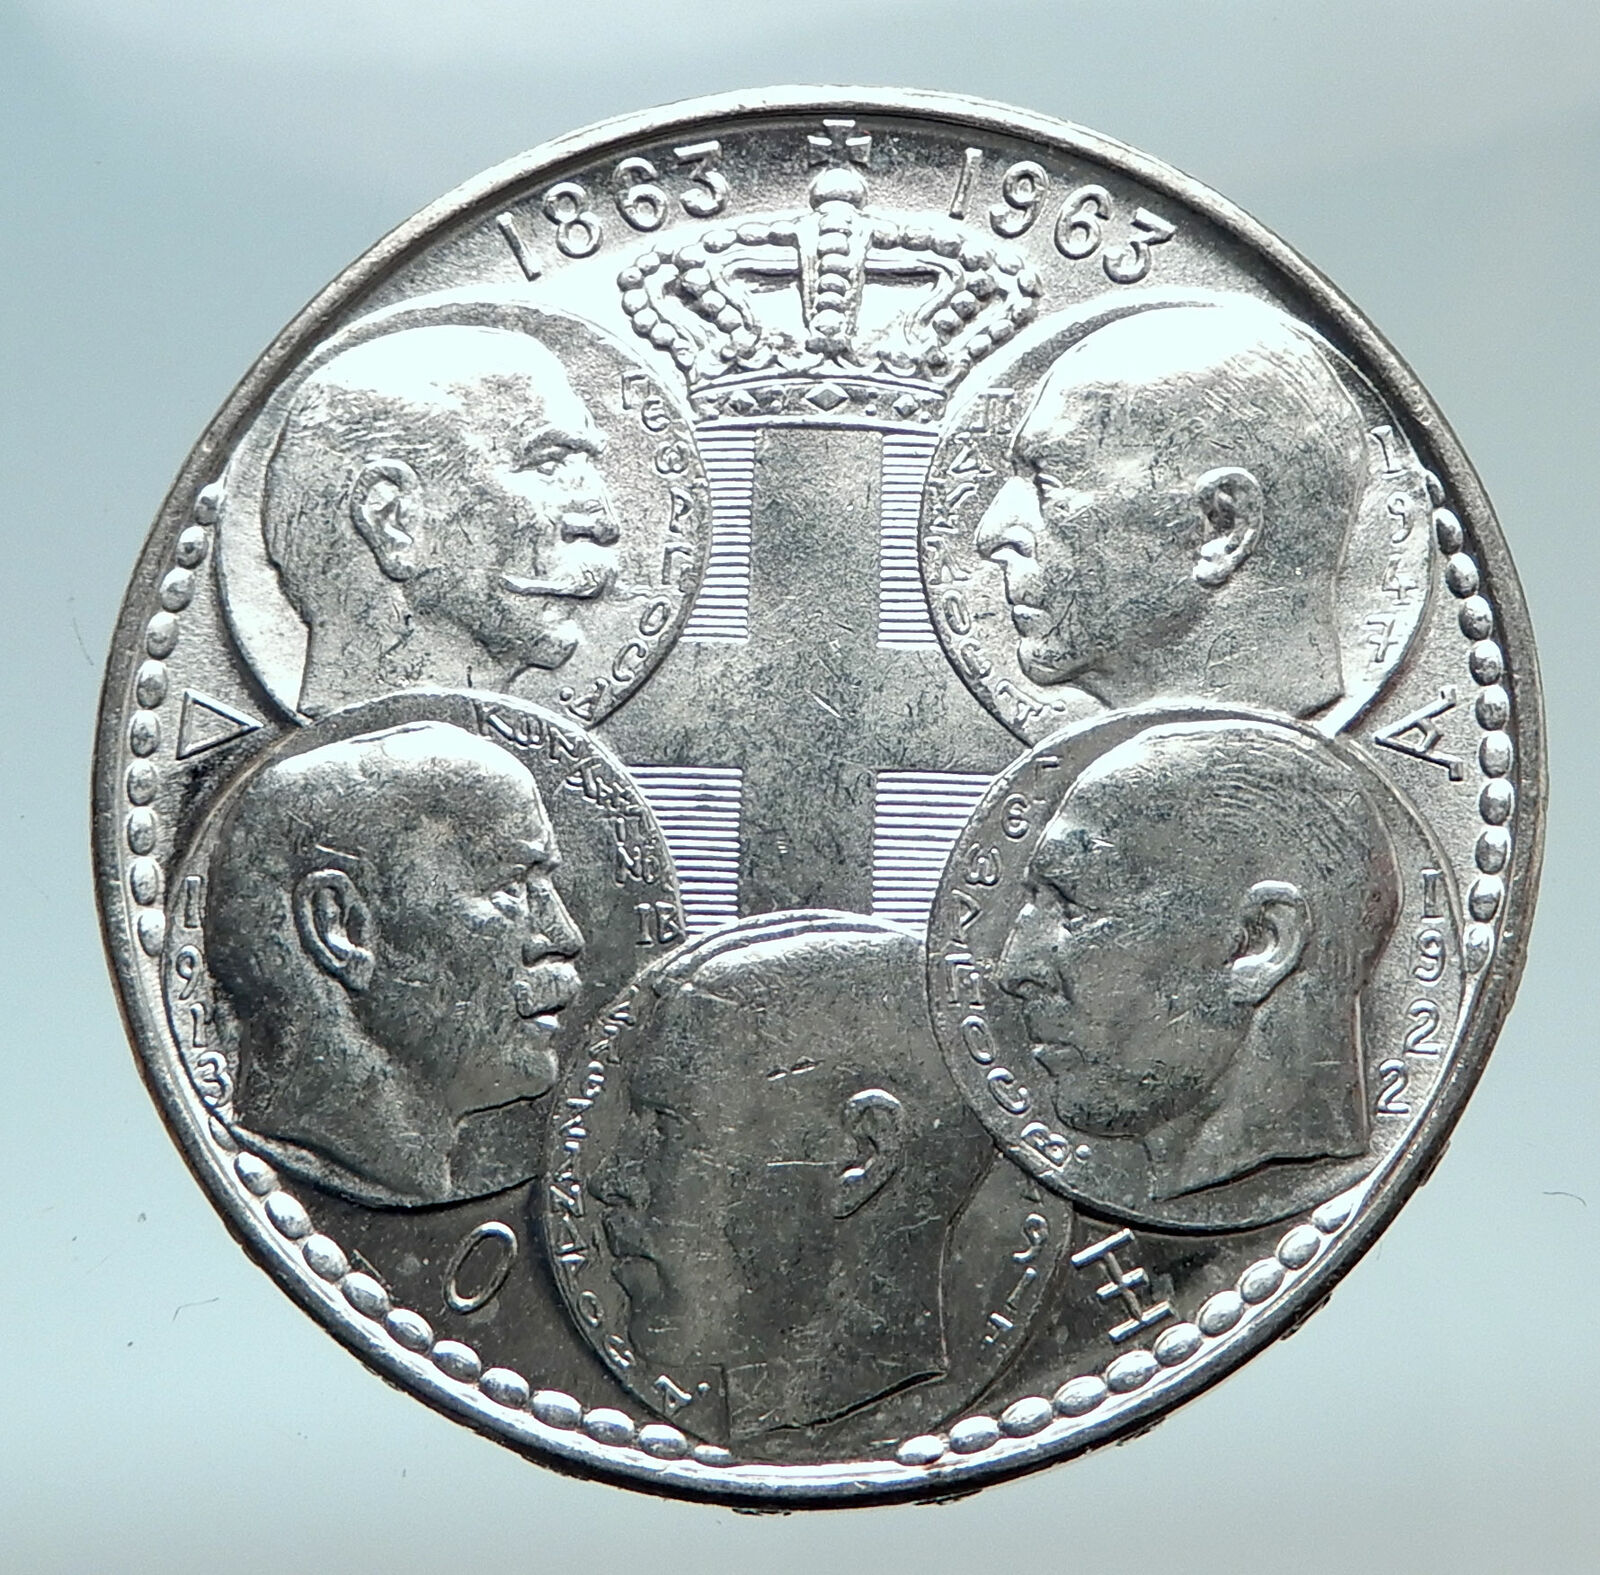 1963 GREECE w PAUL GEORGE I &II ALEXANDER CONSTANTINE Antique Silver Coin i80826